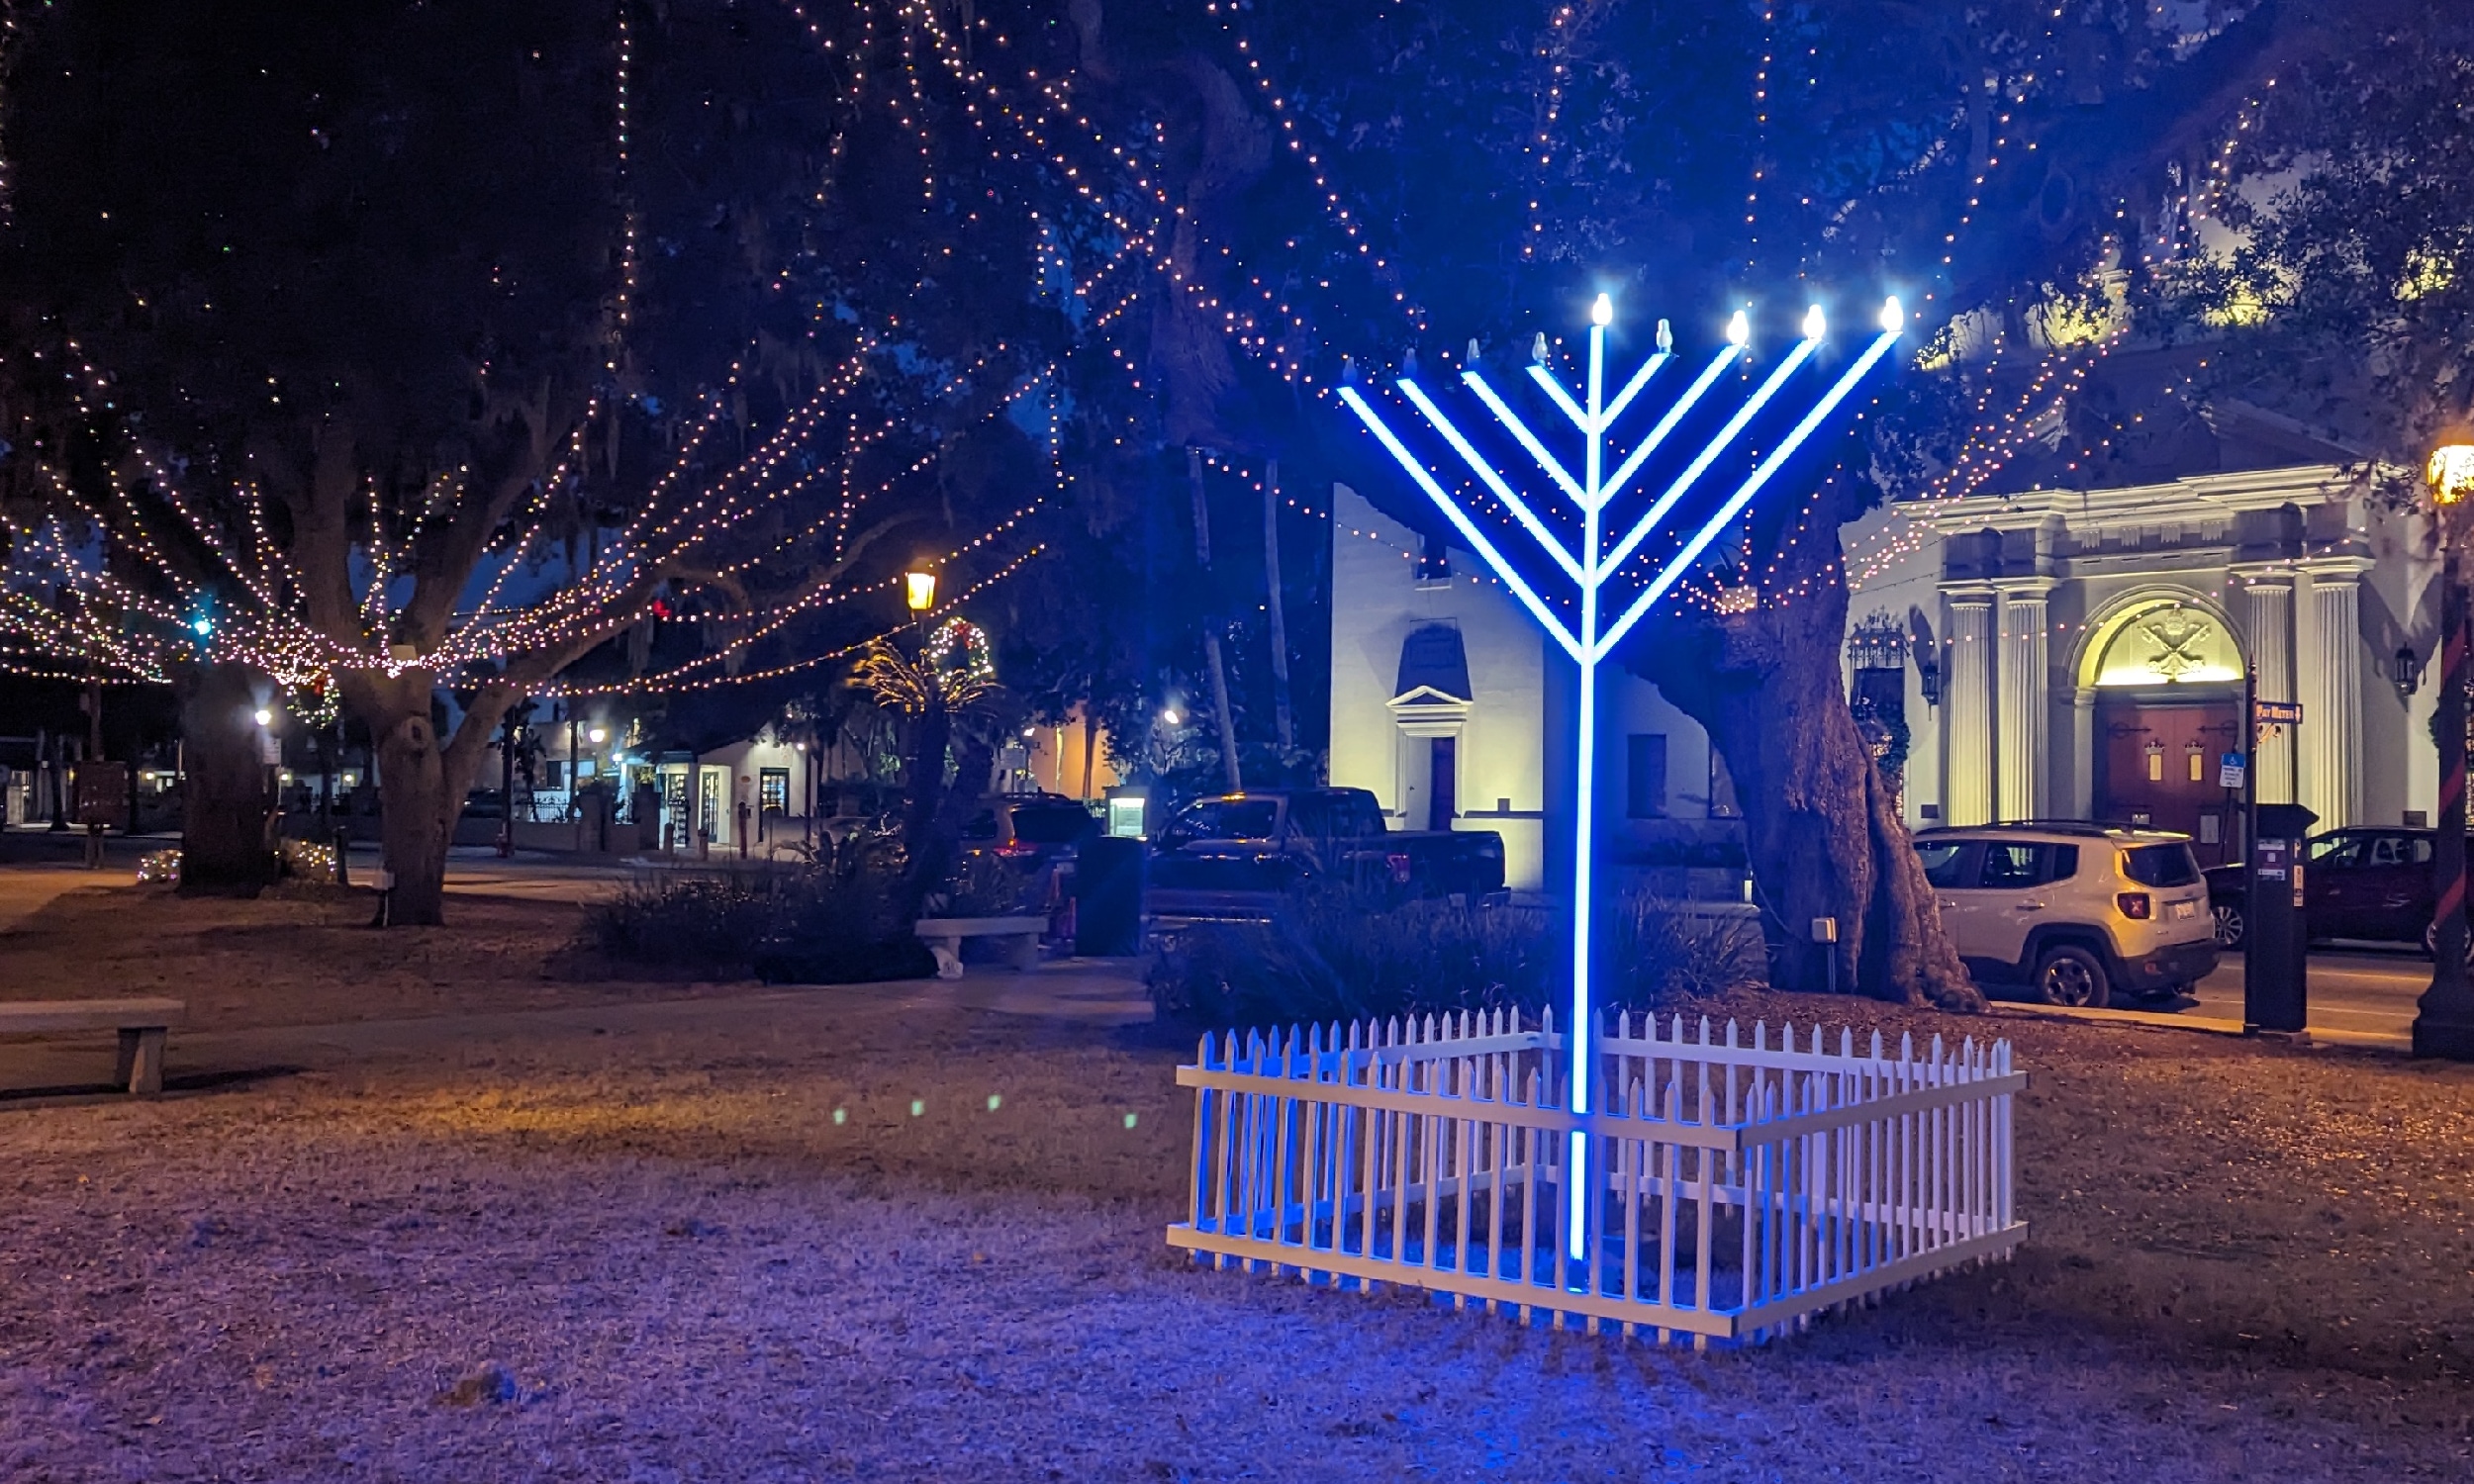 An electric menorah shines in the Plaza each year during Hannukah